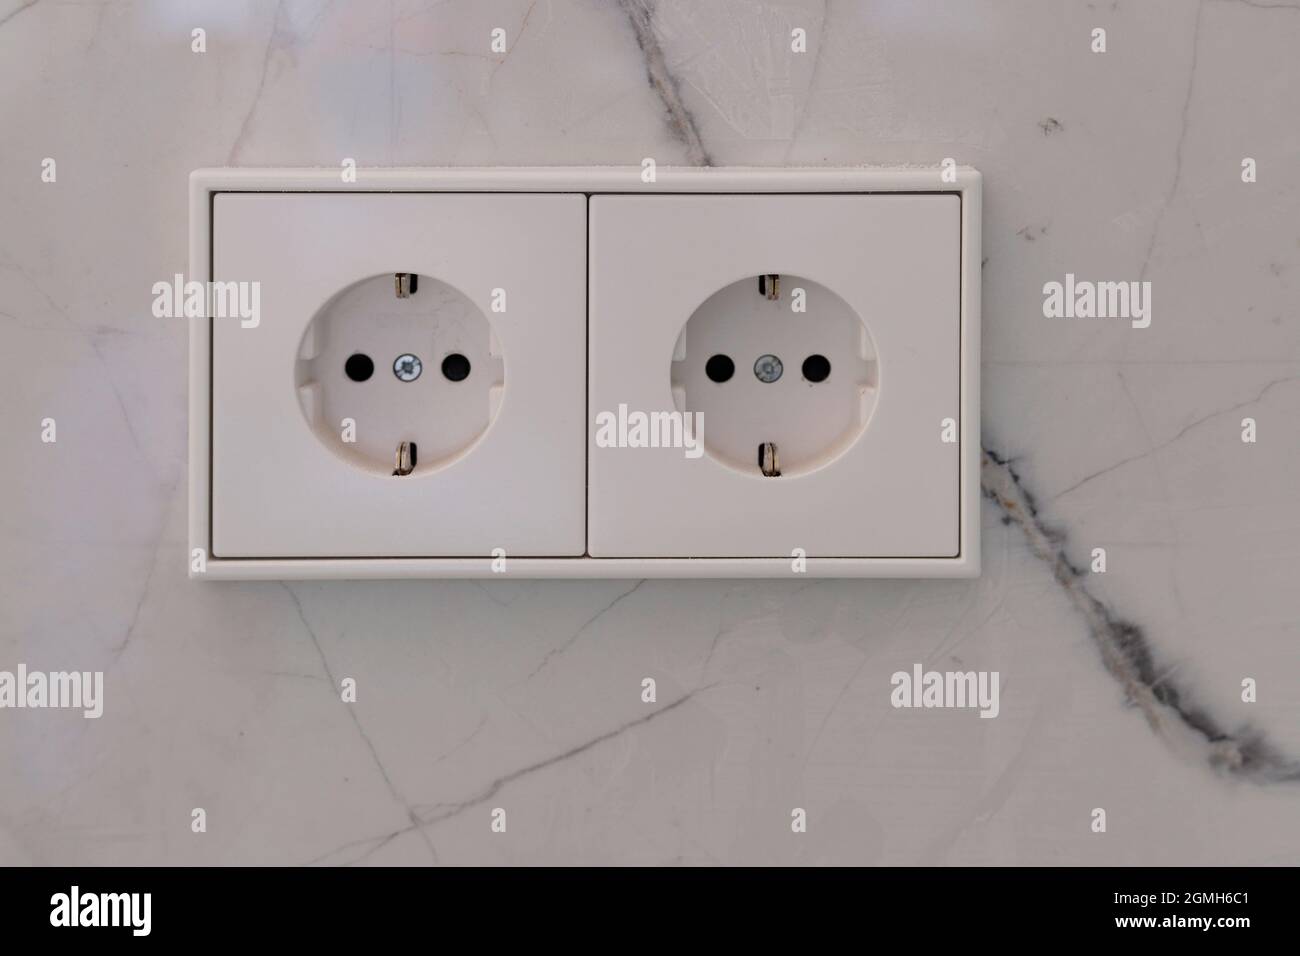 Double Socket High Resolution Stock Photography and Images - Alamy